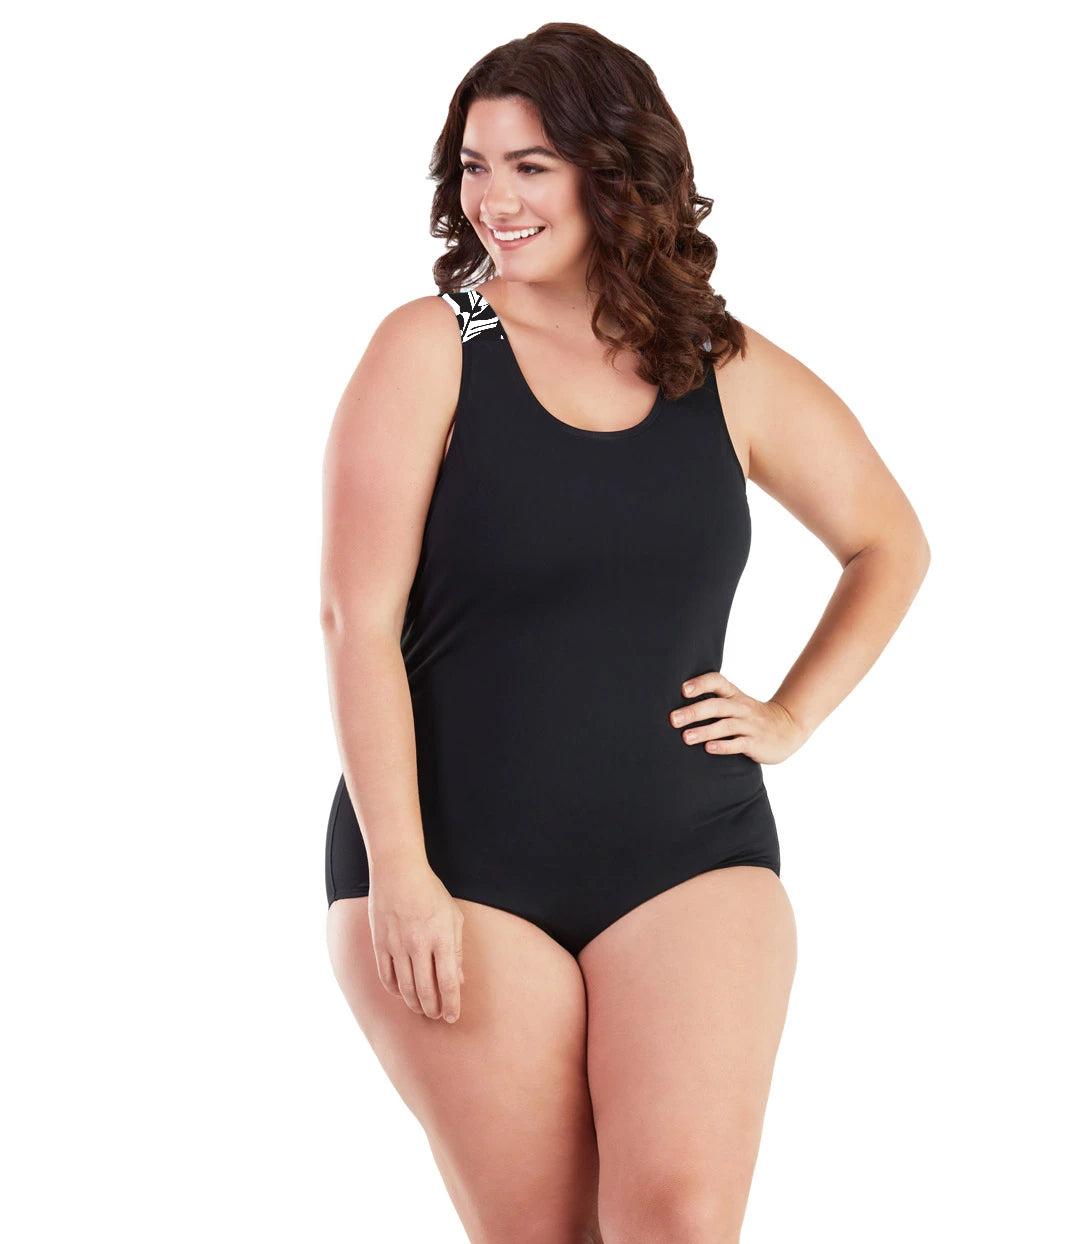 Plus size woman, facing front, wearing JunoActive plus size AquaSport Crossback Tanksuit Tropical Print Black. The shoulders of the tanksuit has a Black and white Tropical leaf print. The main body of the suit is solid black, has a scoop neckline and conservative leg opening.